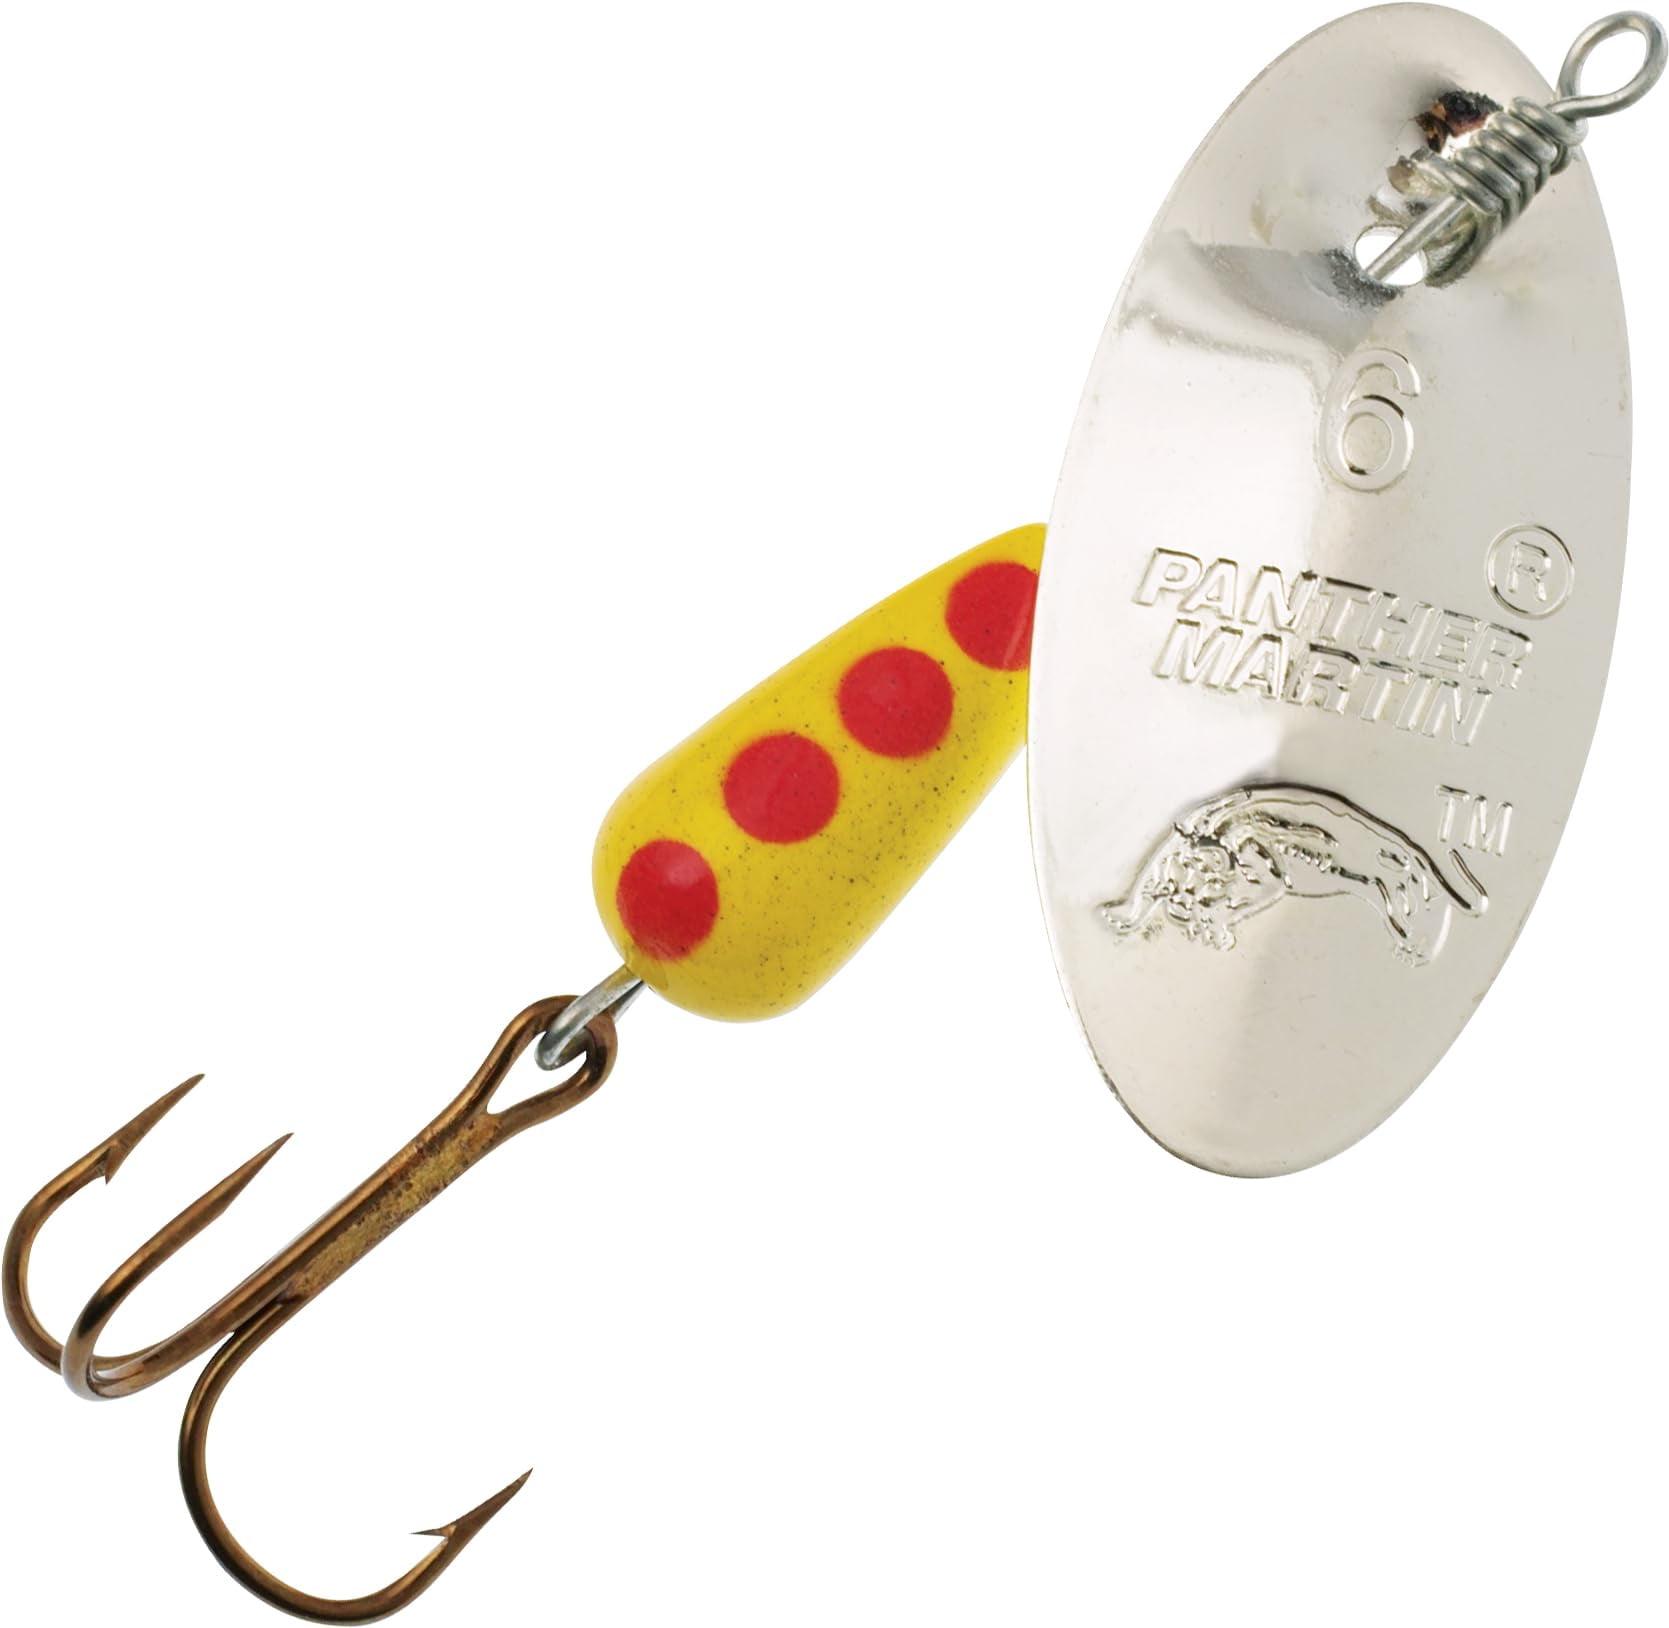 Panther Martin PMR_9_S Classic Regular Teardrop Spinners Fishing Lure -  Silver - 9 (3/8 oz) 